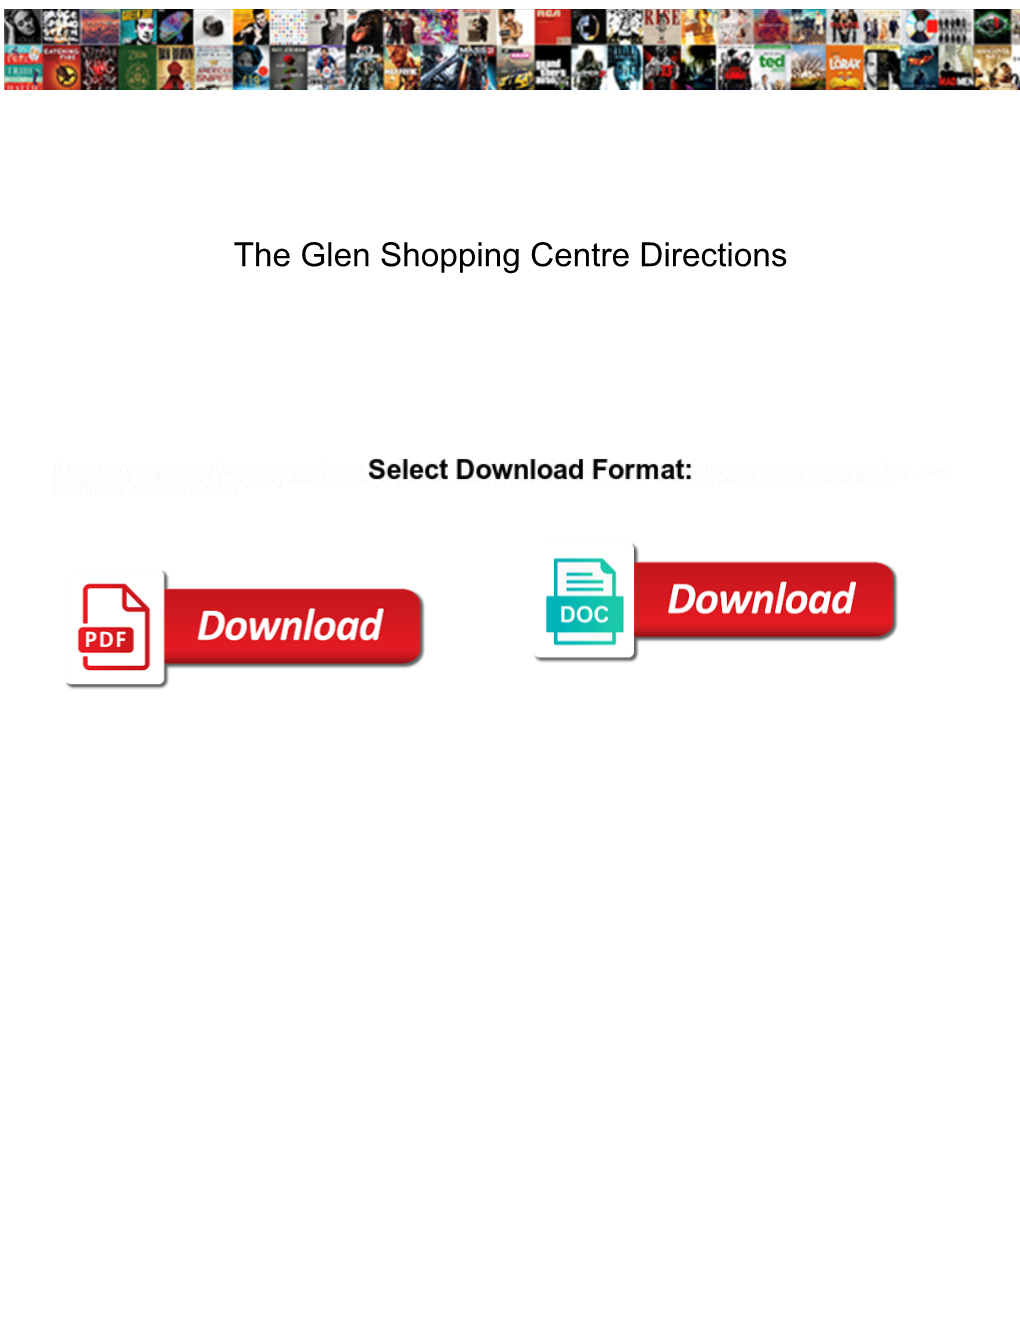 The Glen Shopping Centre Directions